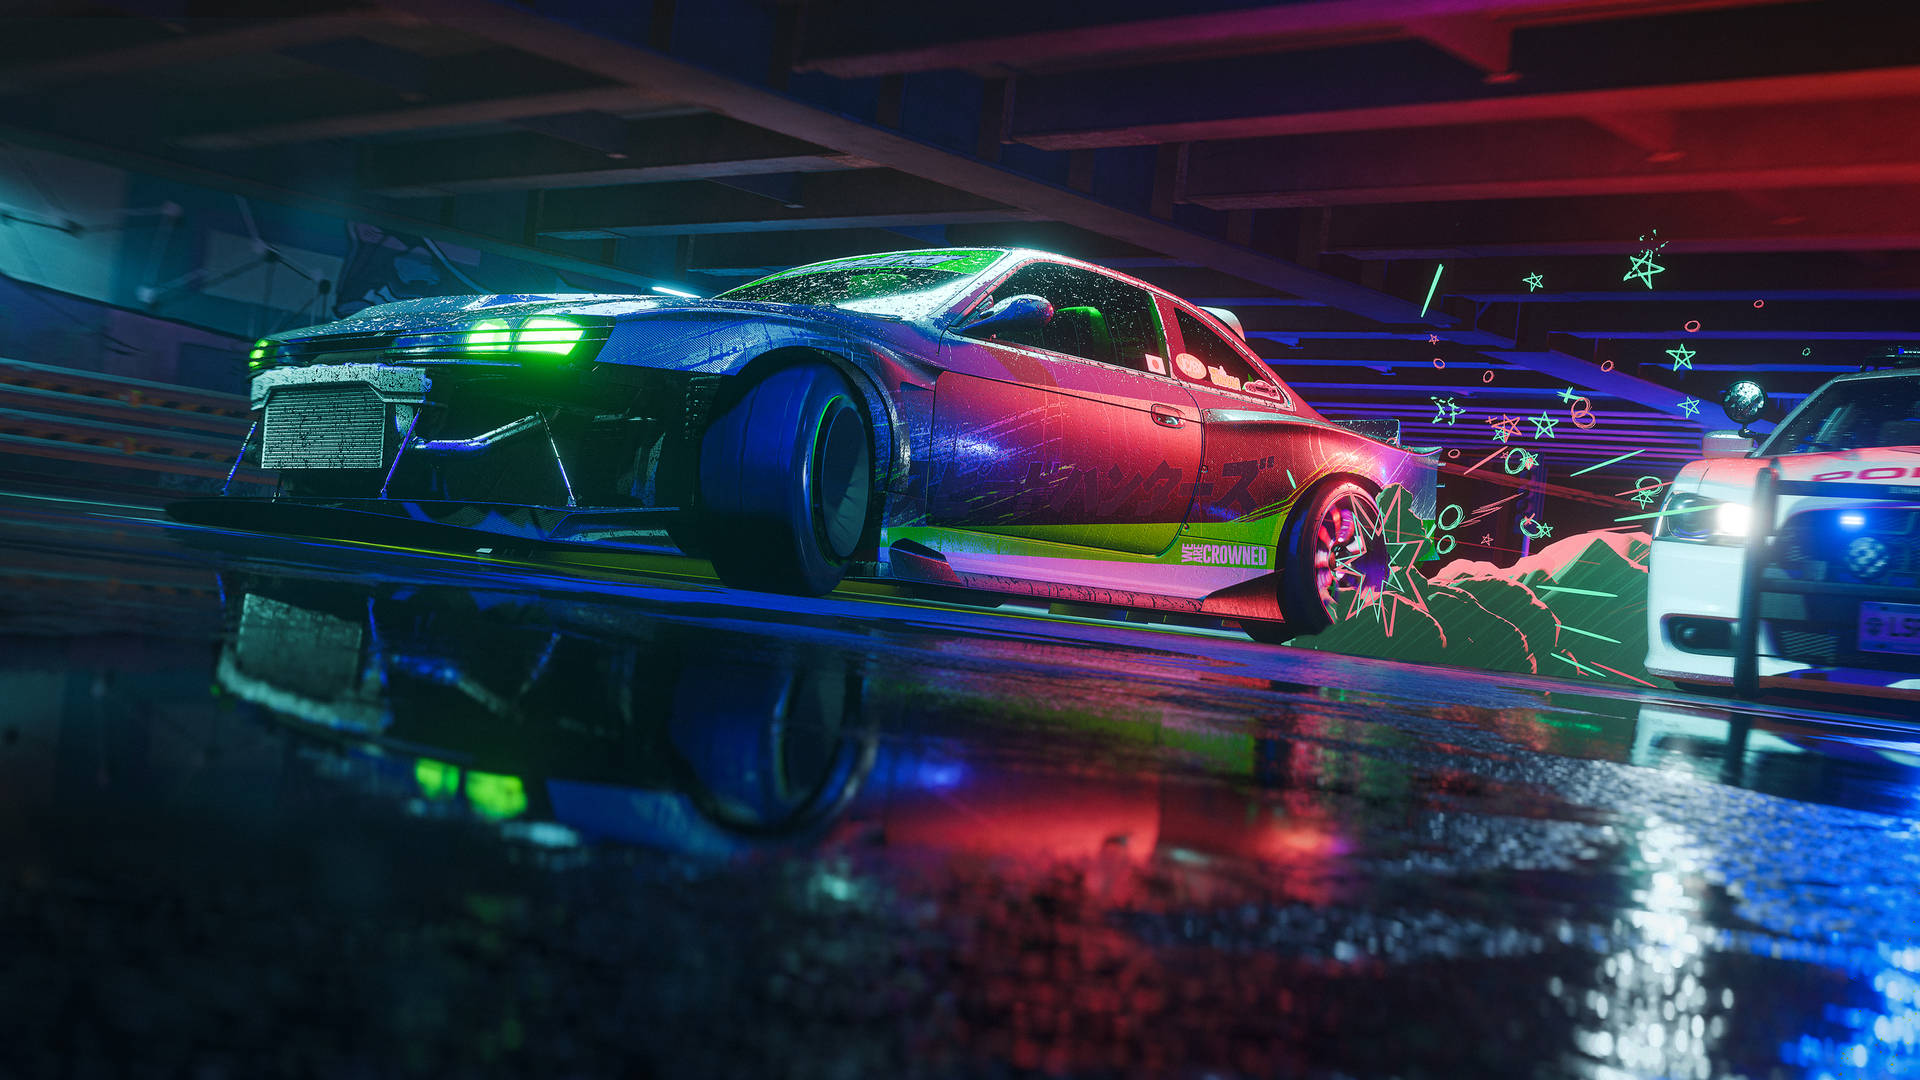 Aesthetic 4k Car Need For Speed Background